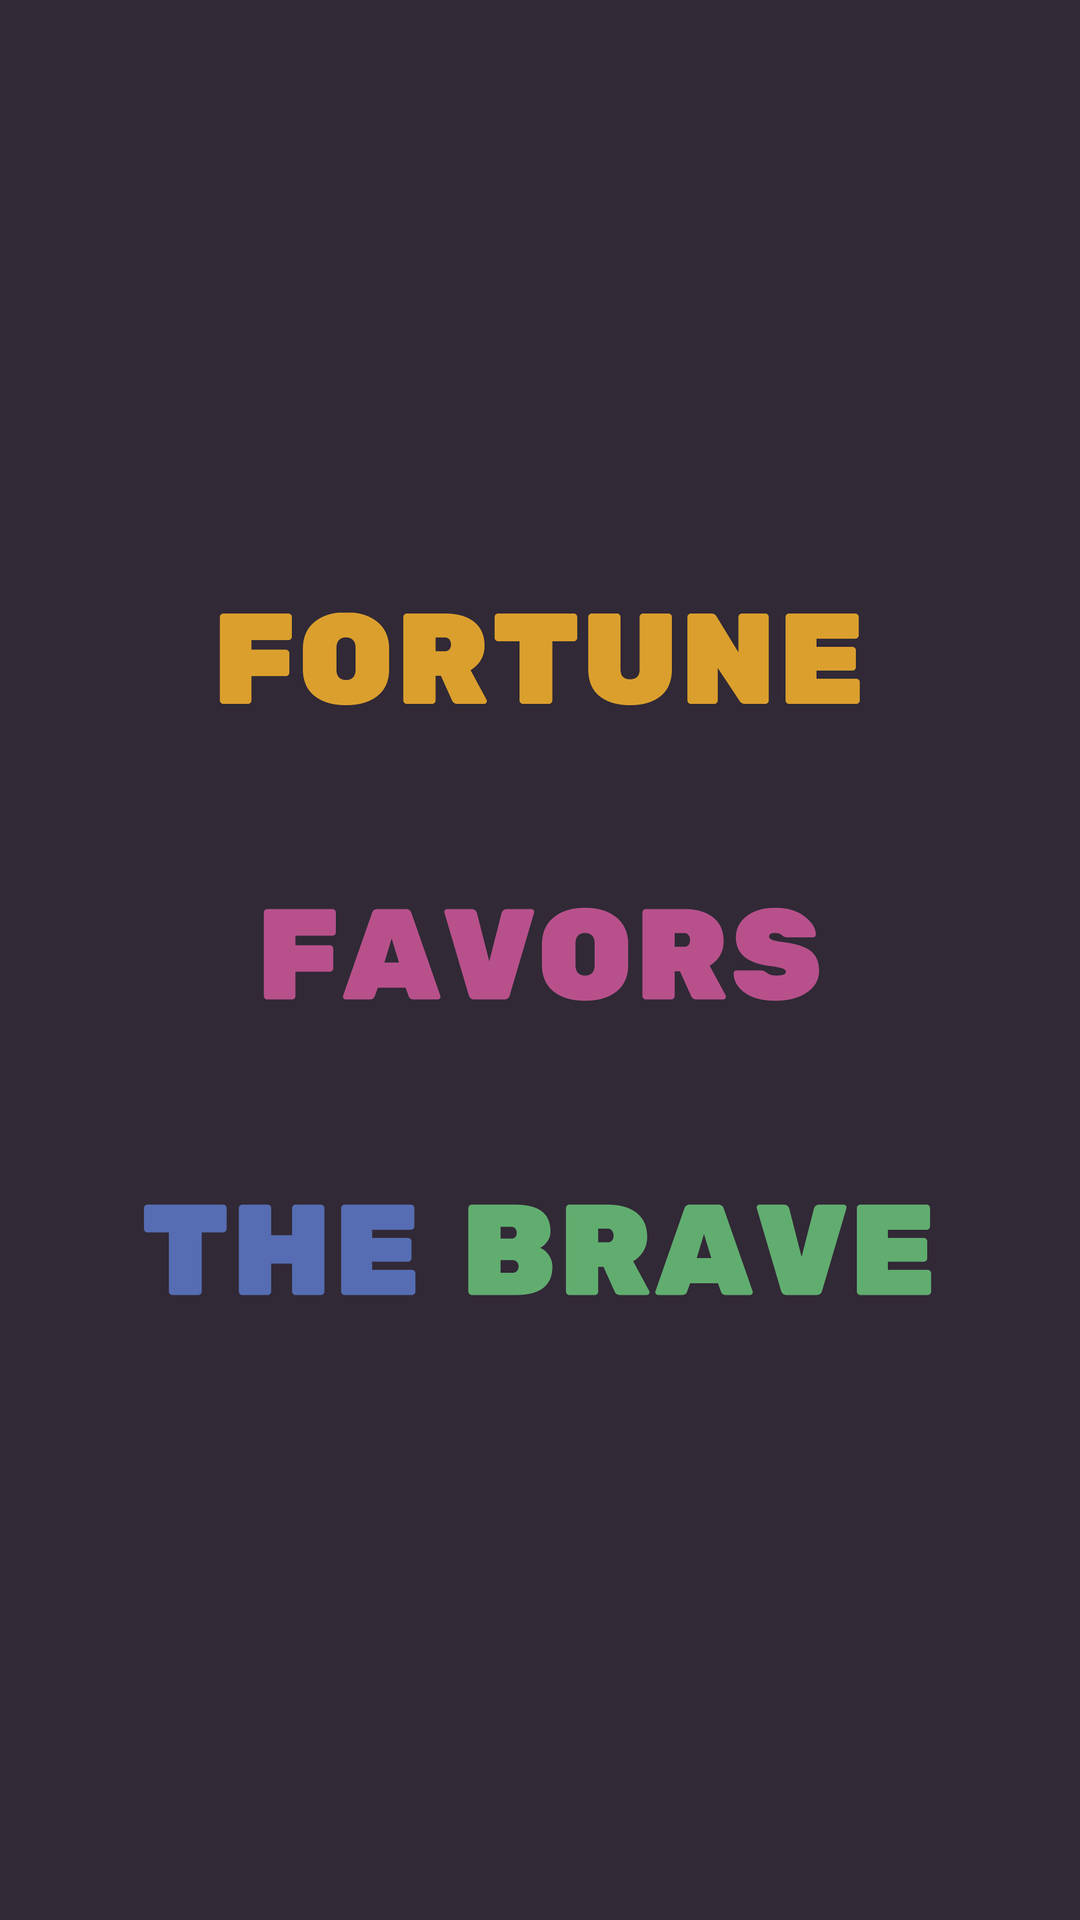 Inspirational Bravery Quote Wallpaper